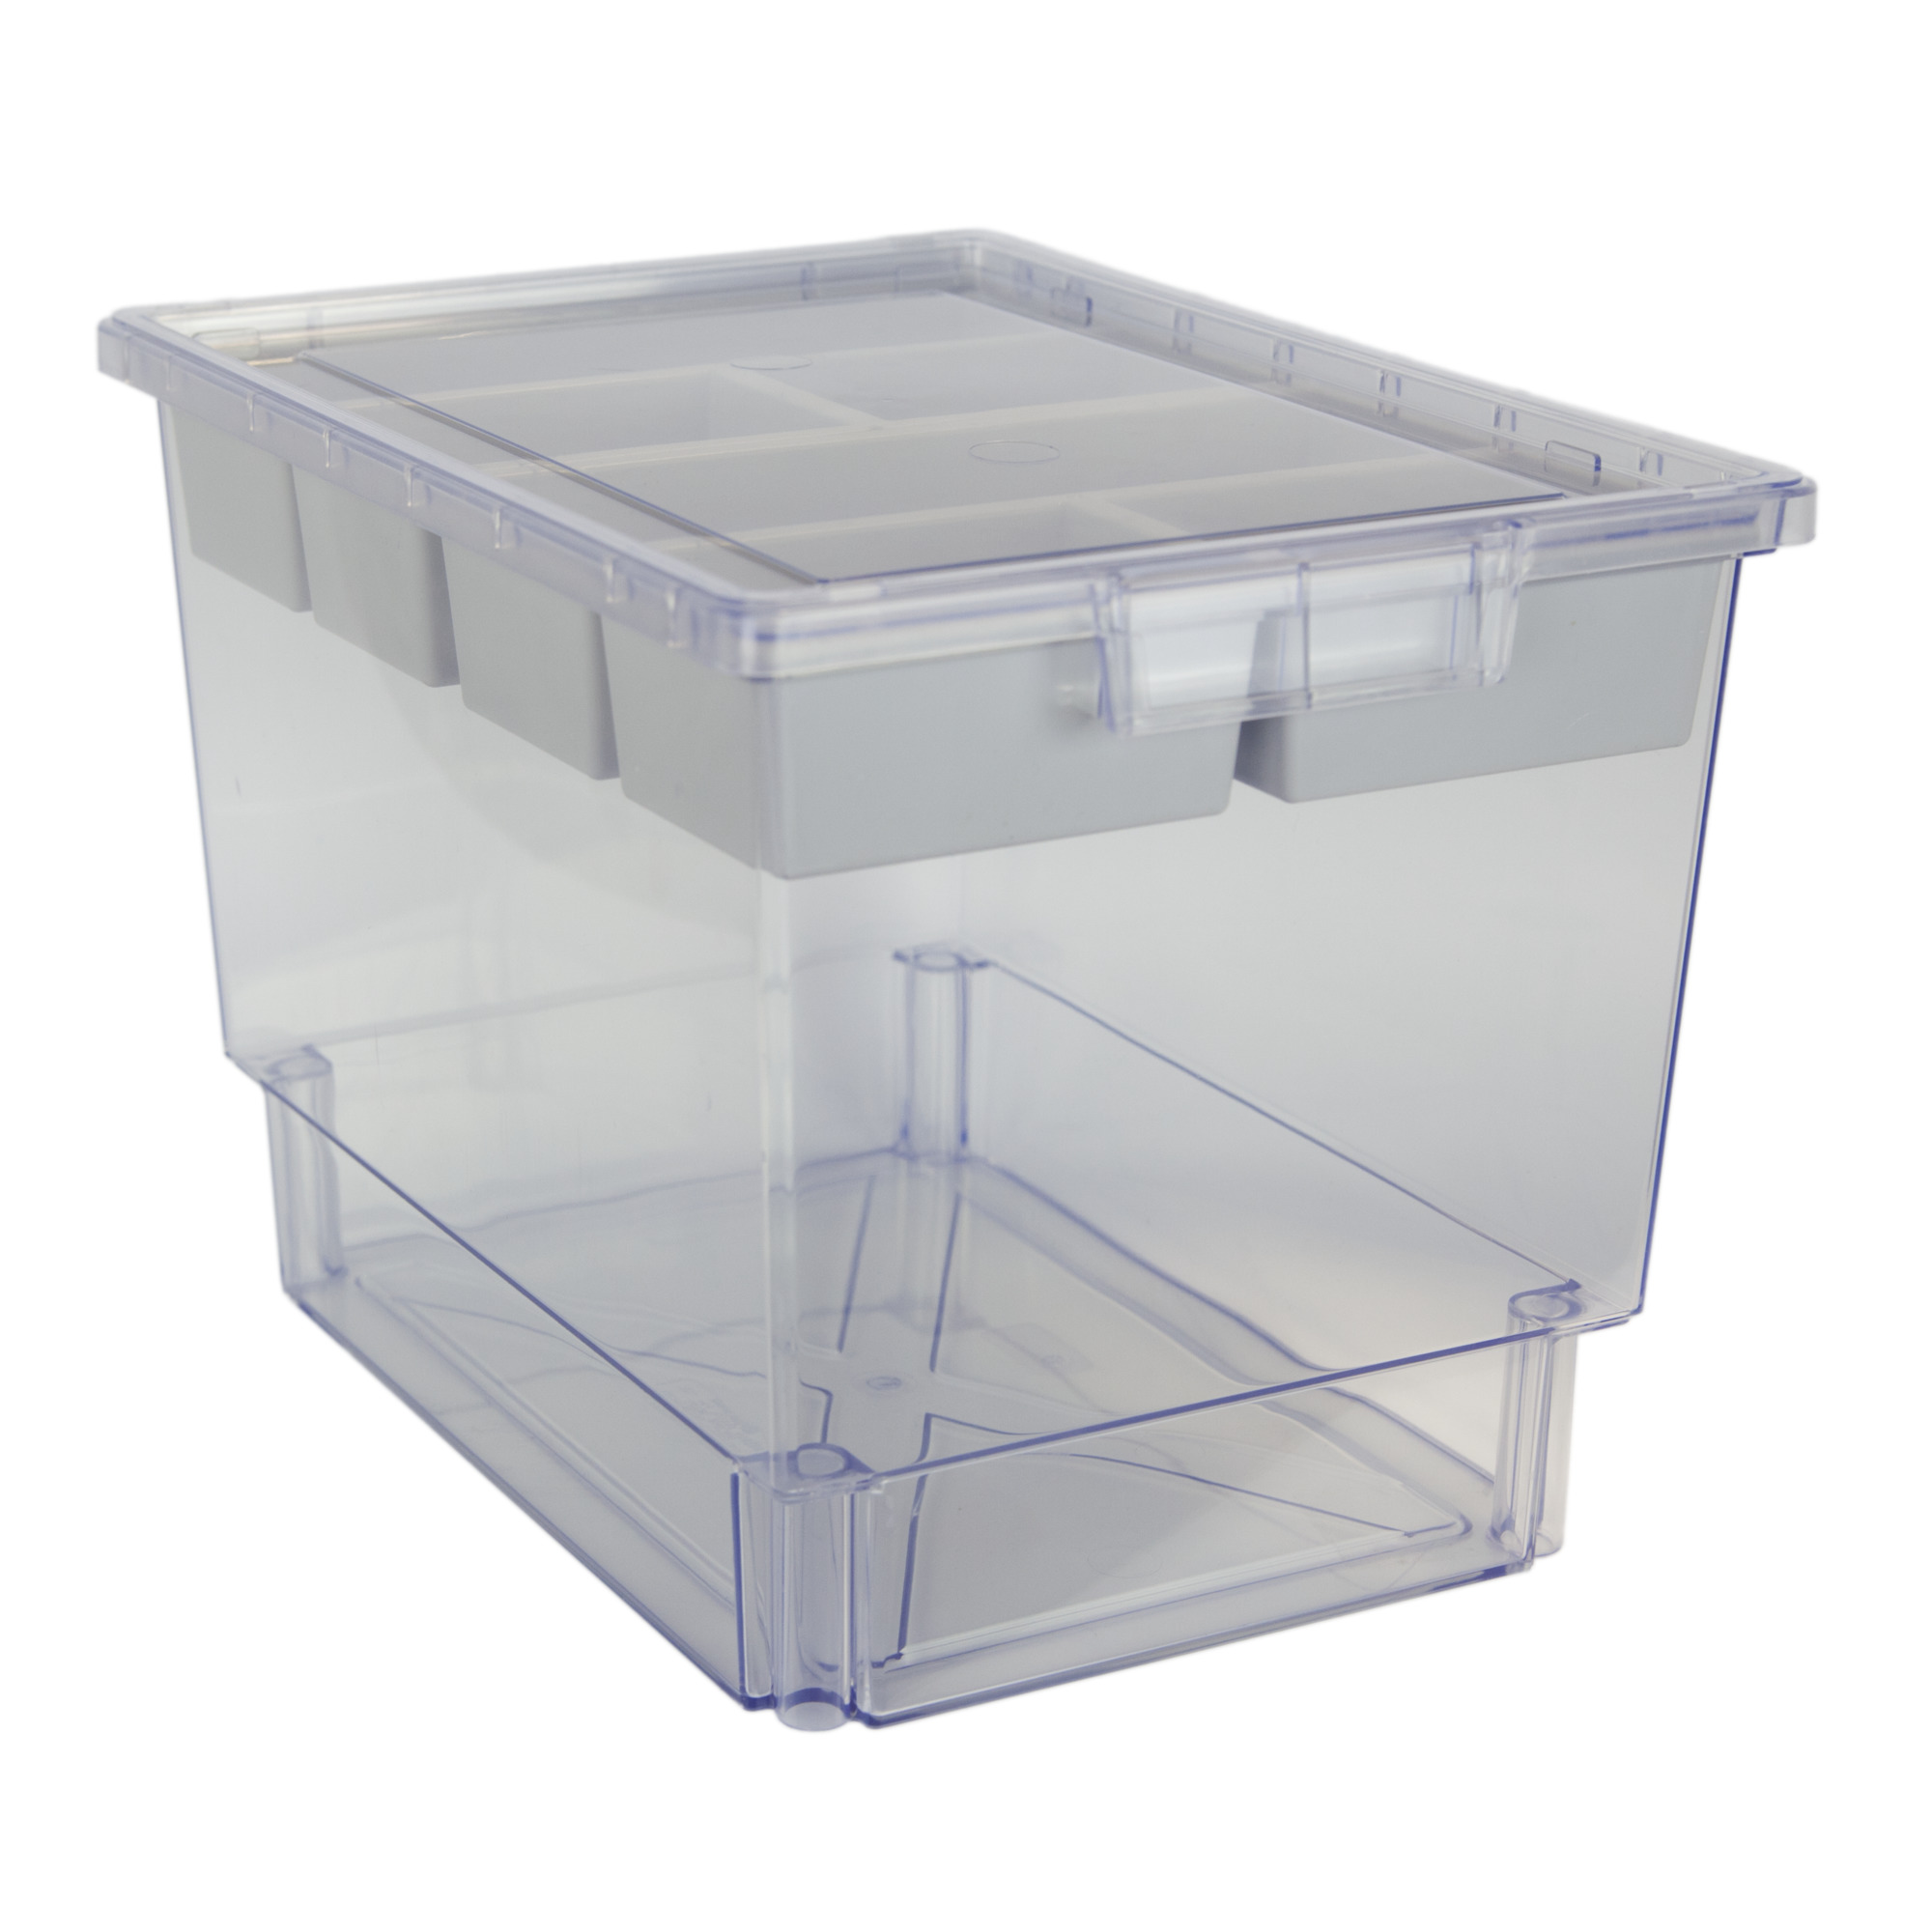 Certwood StorWerks, Slim Line 12Inch Tray Kit (3 x Divisions) Clear-3PK, Included (qty.) 3, Material Plastic, Height 9 in, Model CE1954CL-NK0202-3